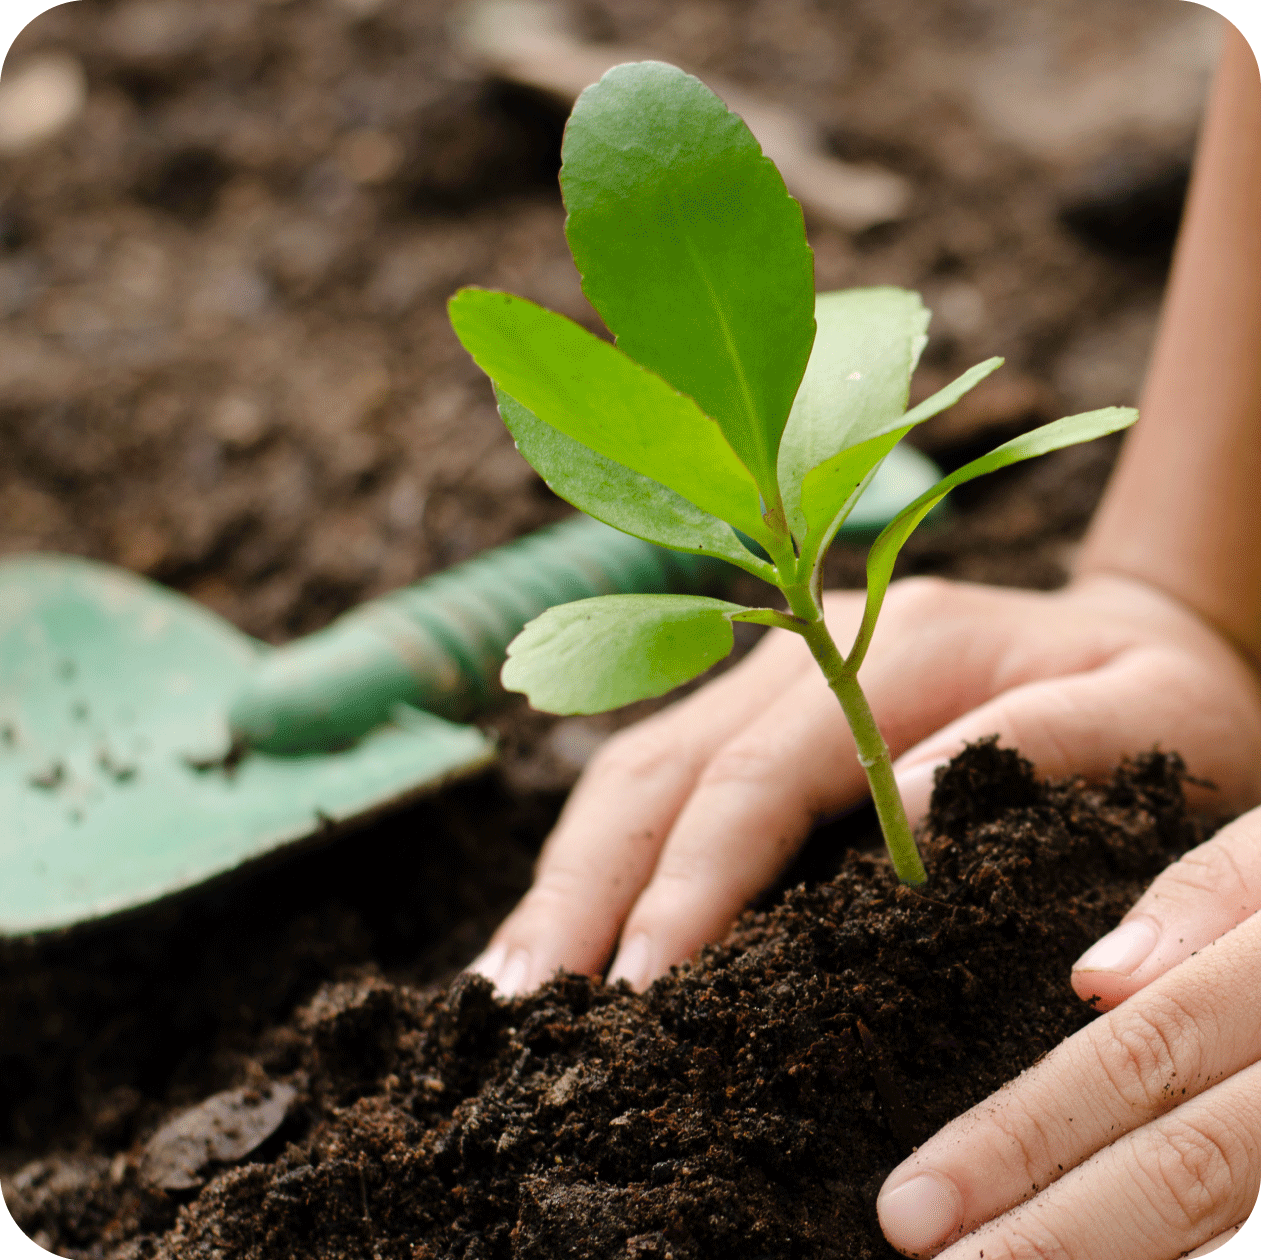 Hands planting a small plant